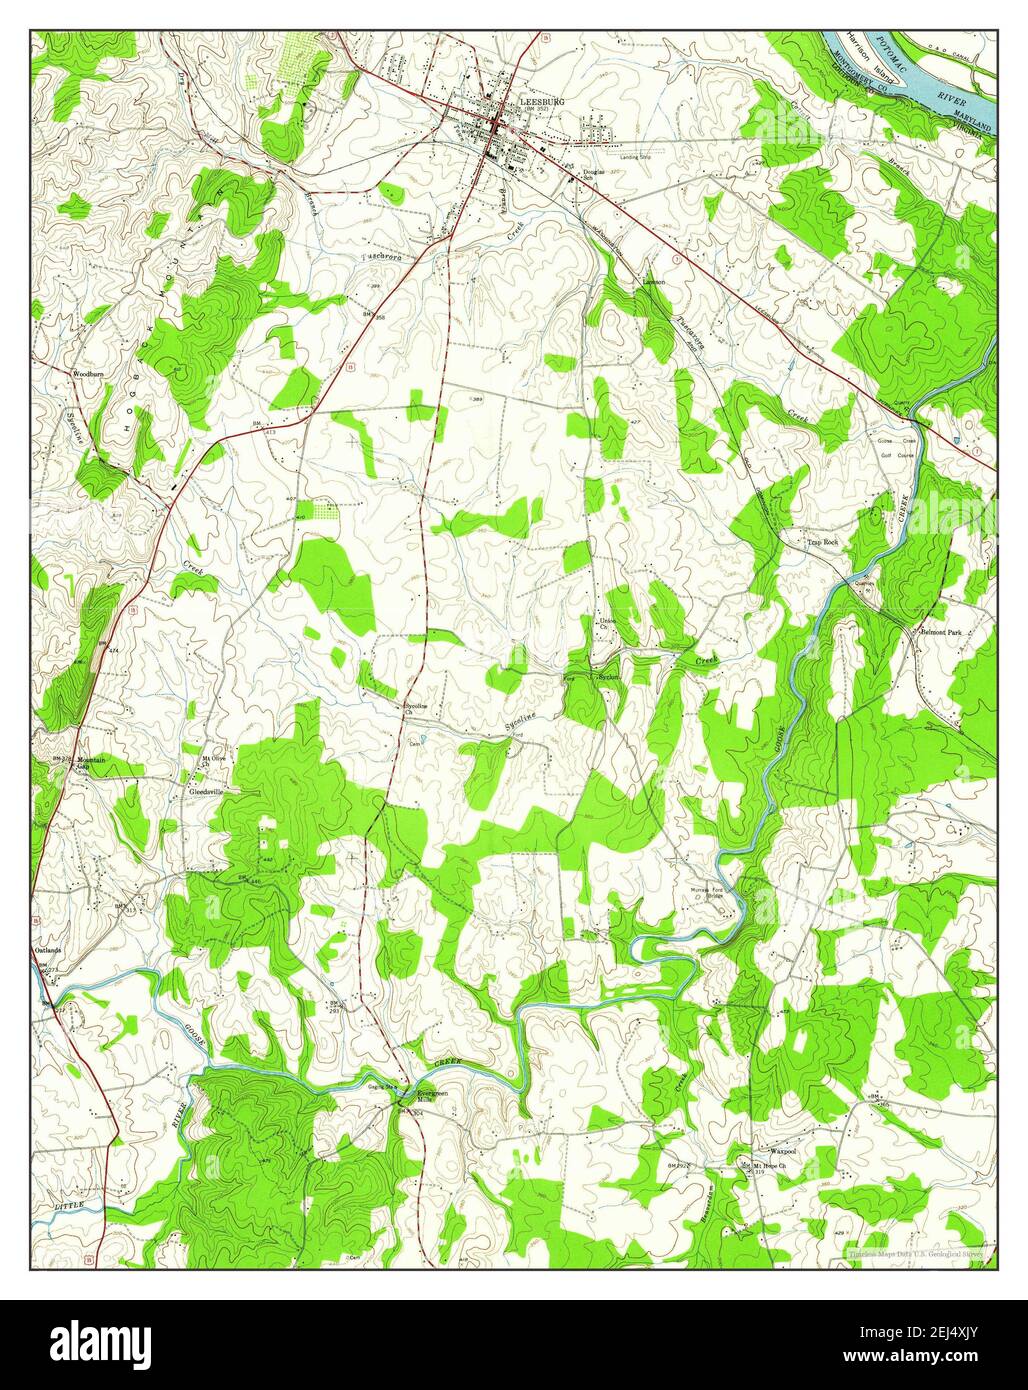 Leesburg, Virginia, map 1952, 1:24000, United States of America by Timeless Maps, data U.S. Geological Survey Stock Photo